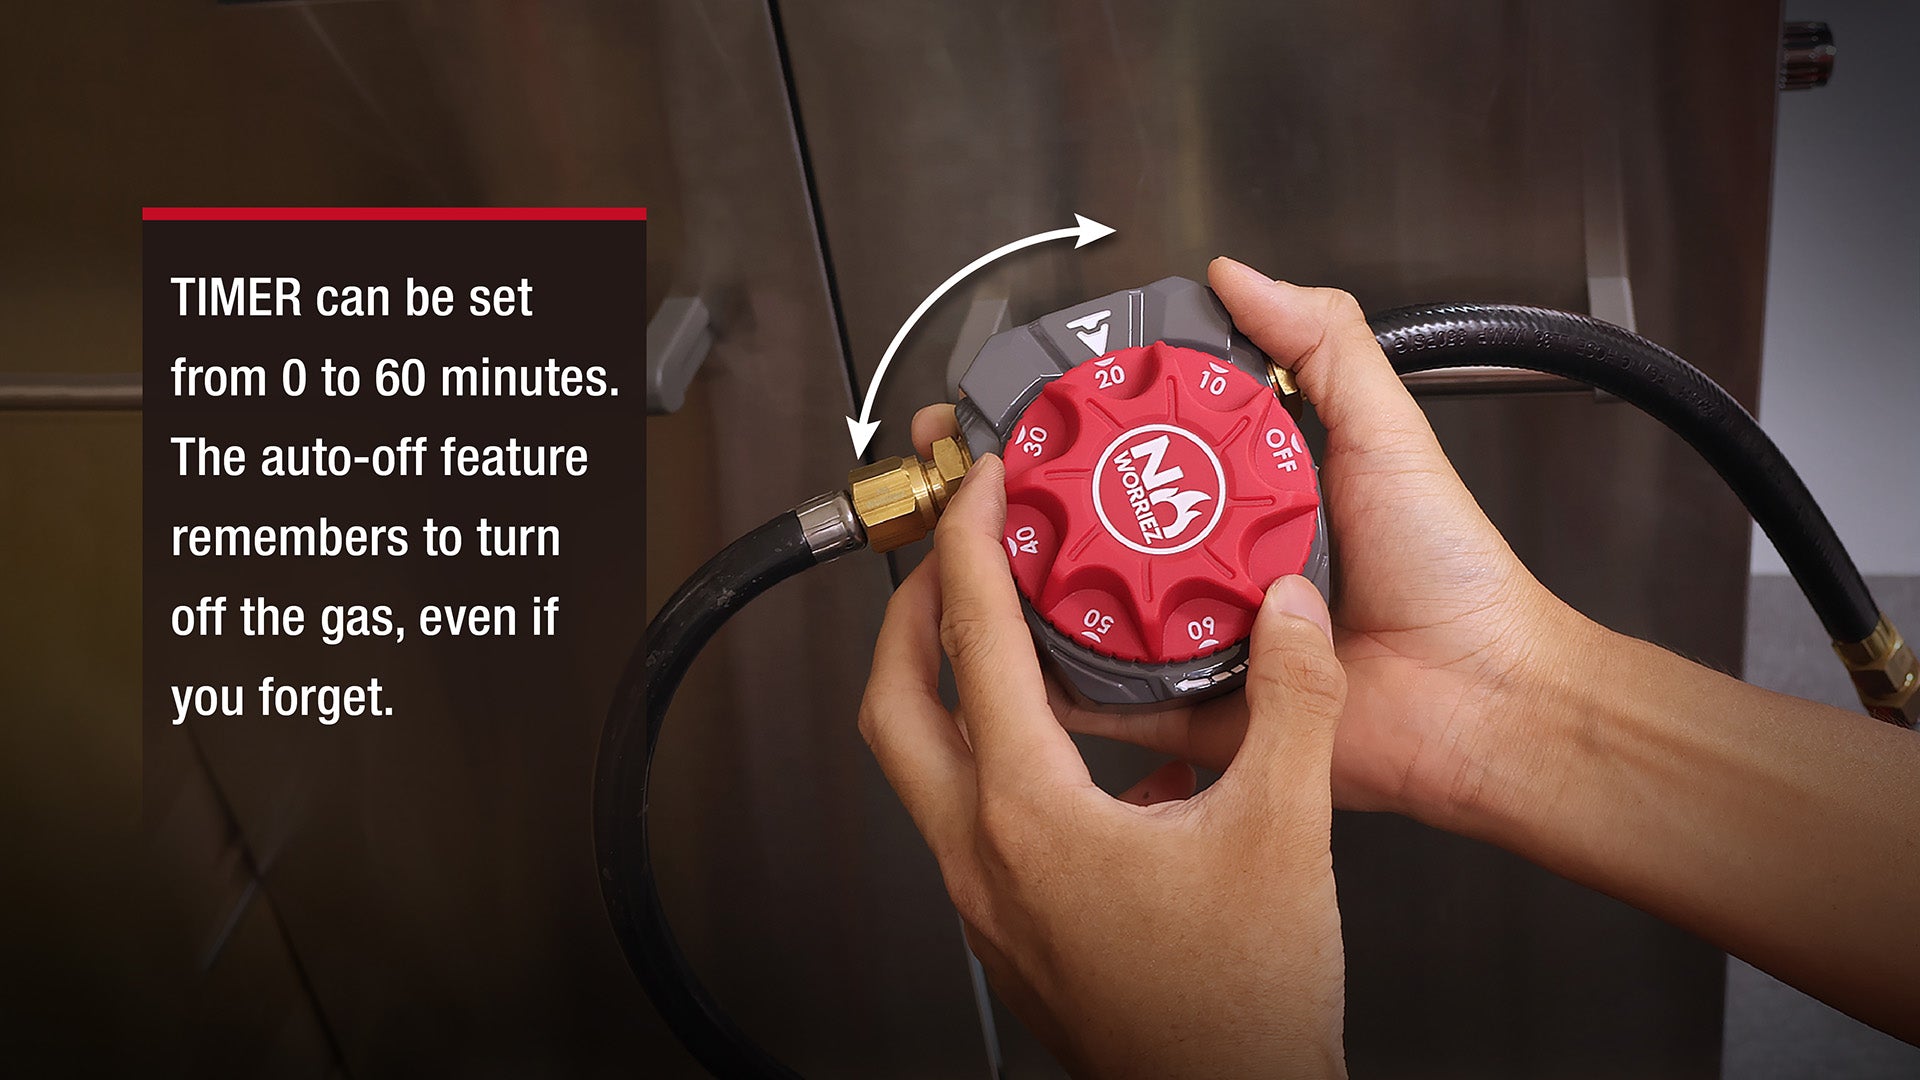 No Worriez gas timer can be set from 0 to 60 minutes and auto-off to turn off the gas